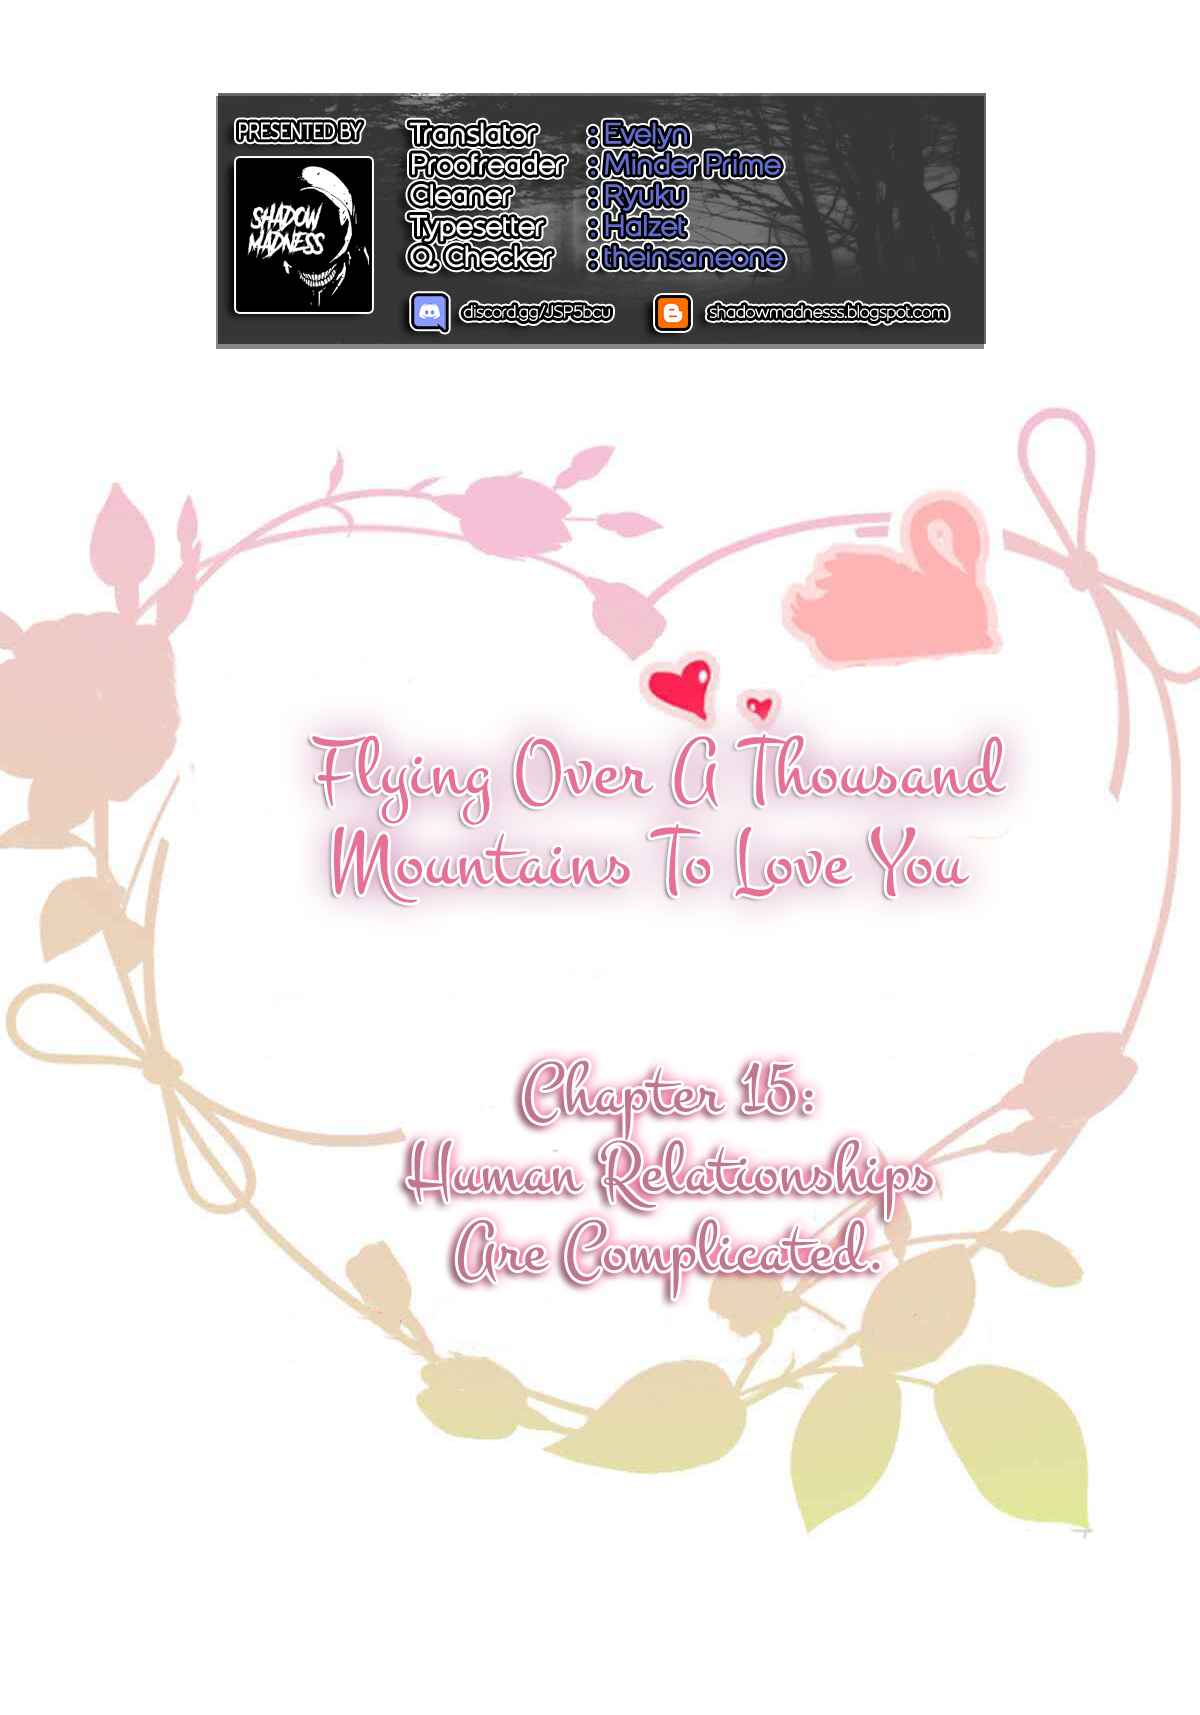 Flying Over a Thousand Mountains to Love You Ch. 15 Human Relationships Are Complicated